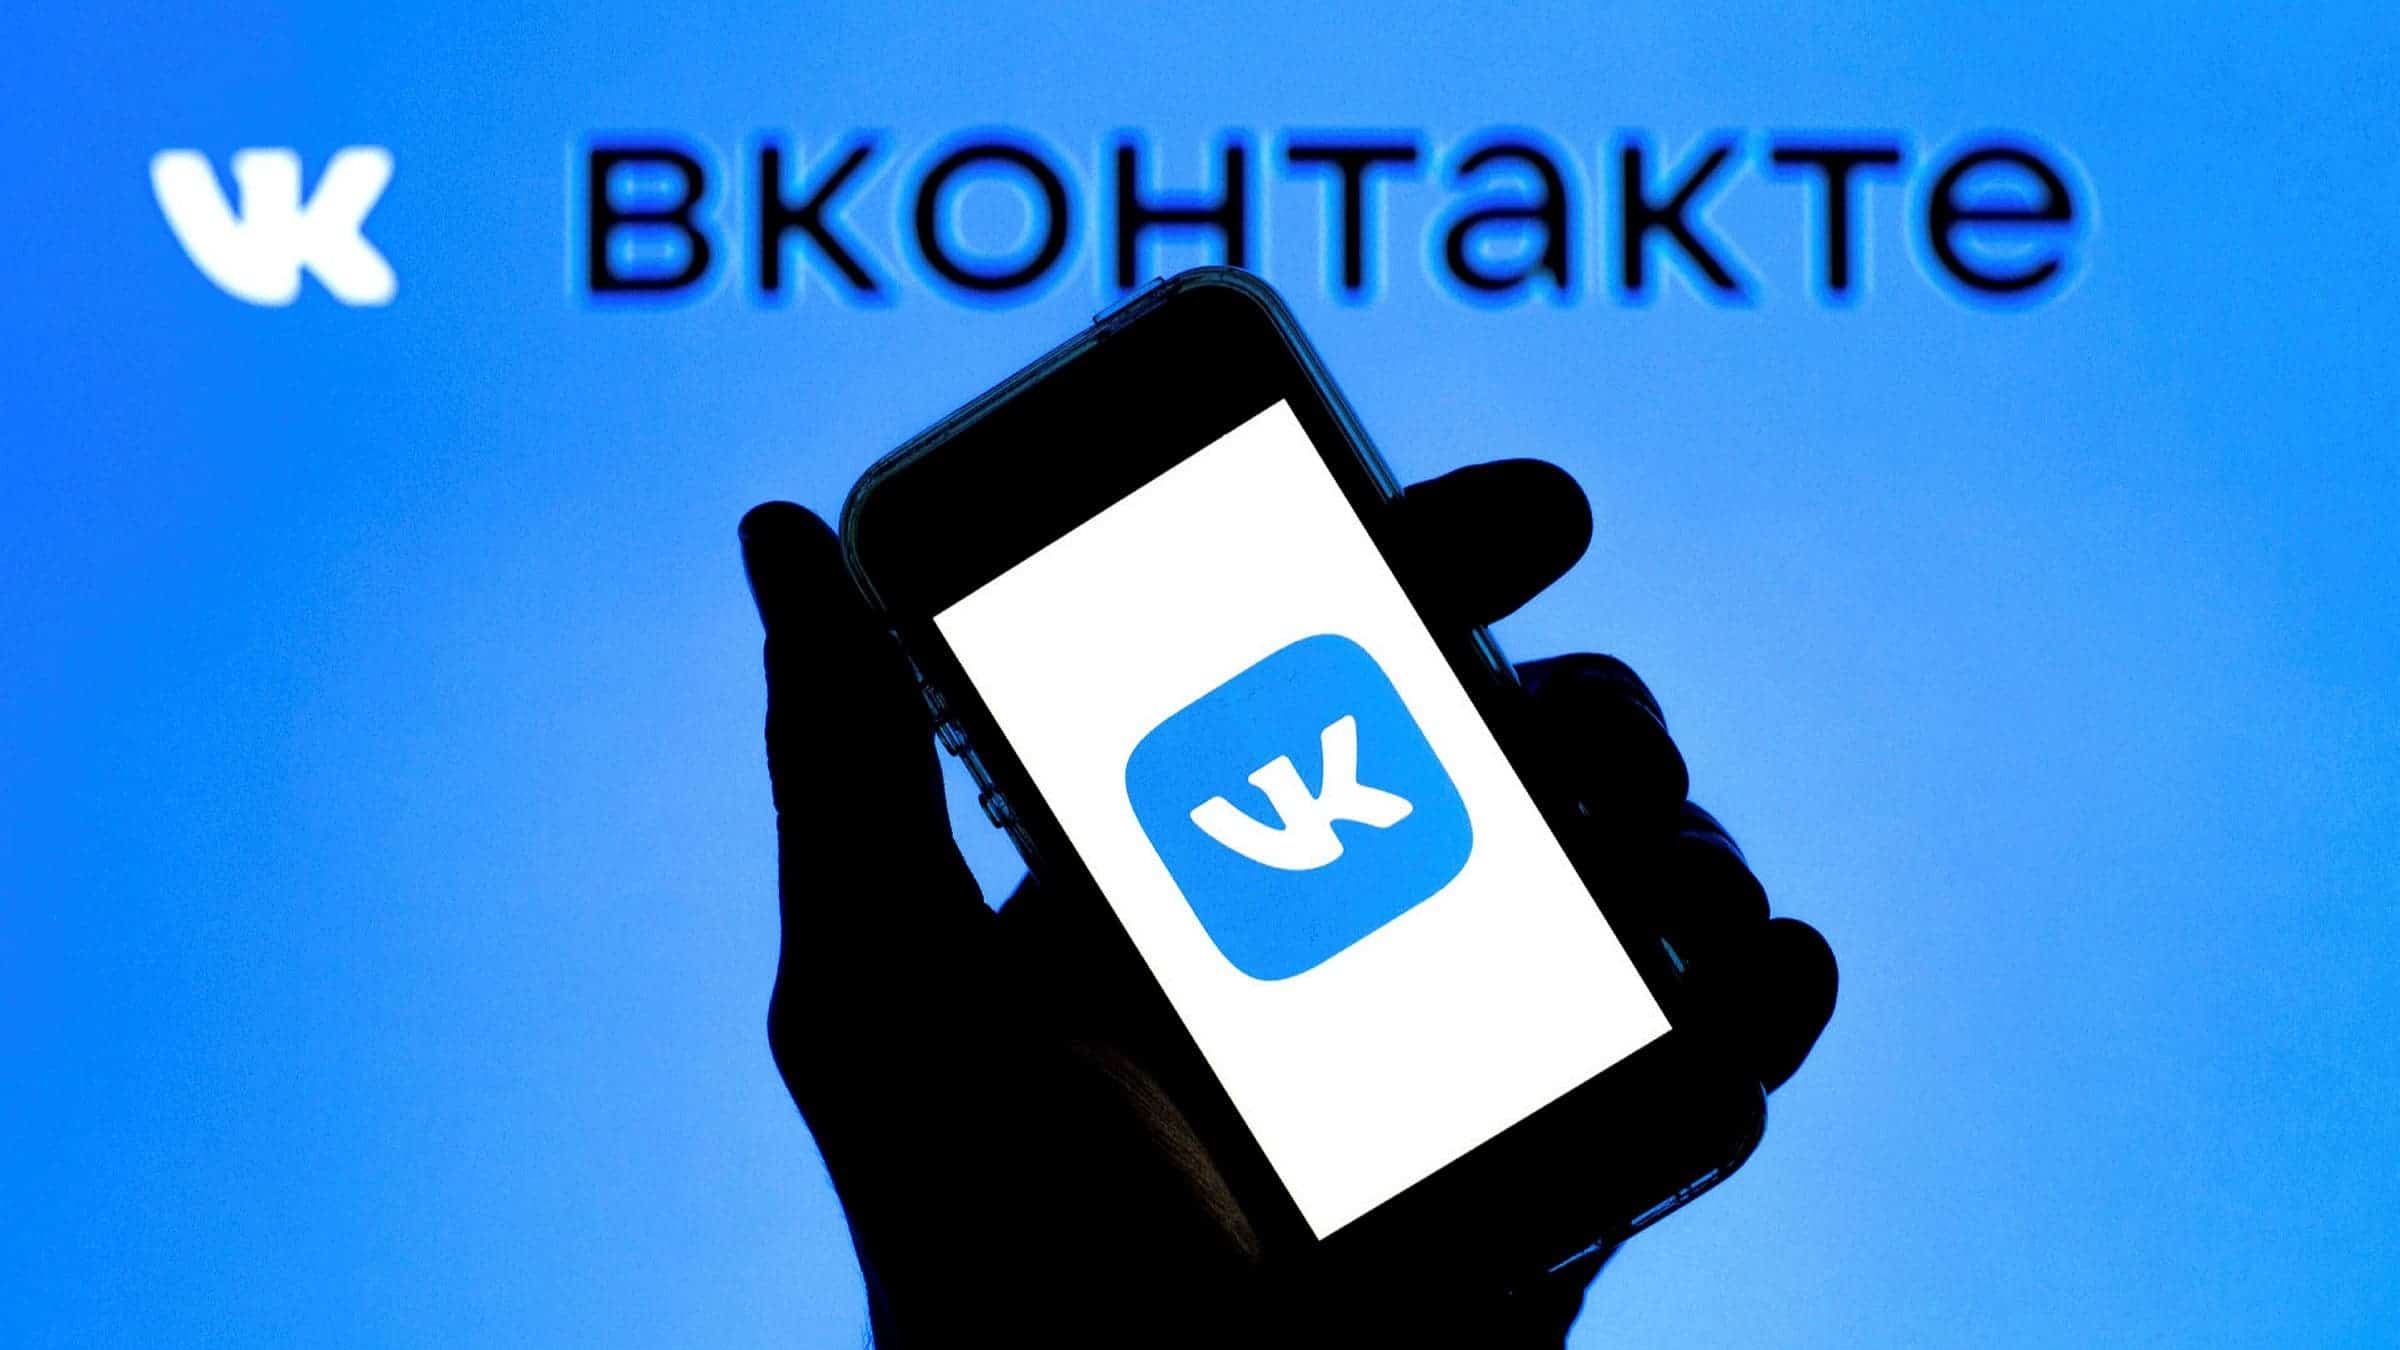 Apple Explains Why It Removed Vkontakte A Local Russian Social App